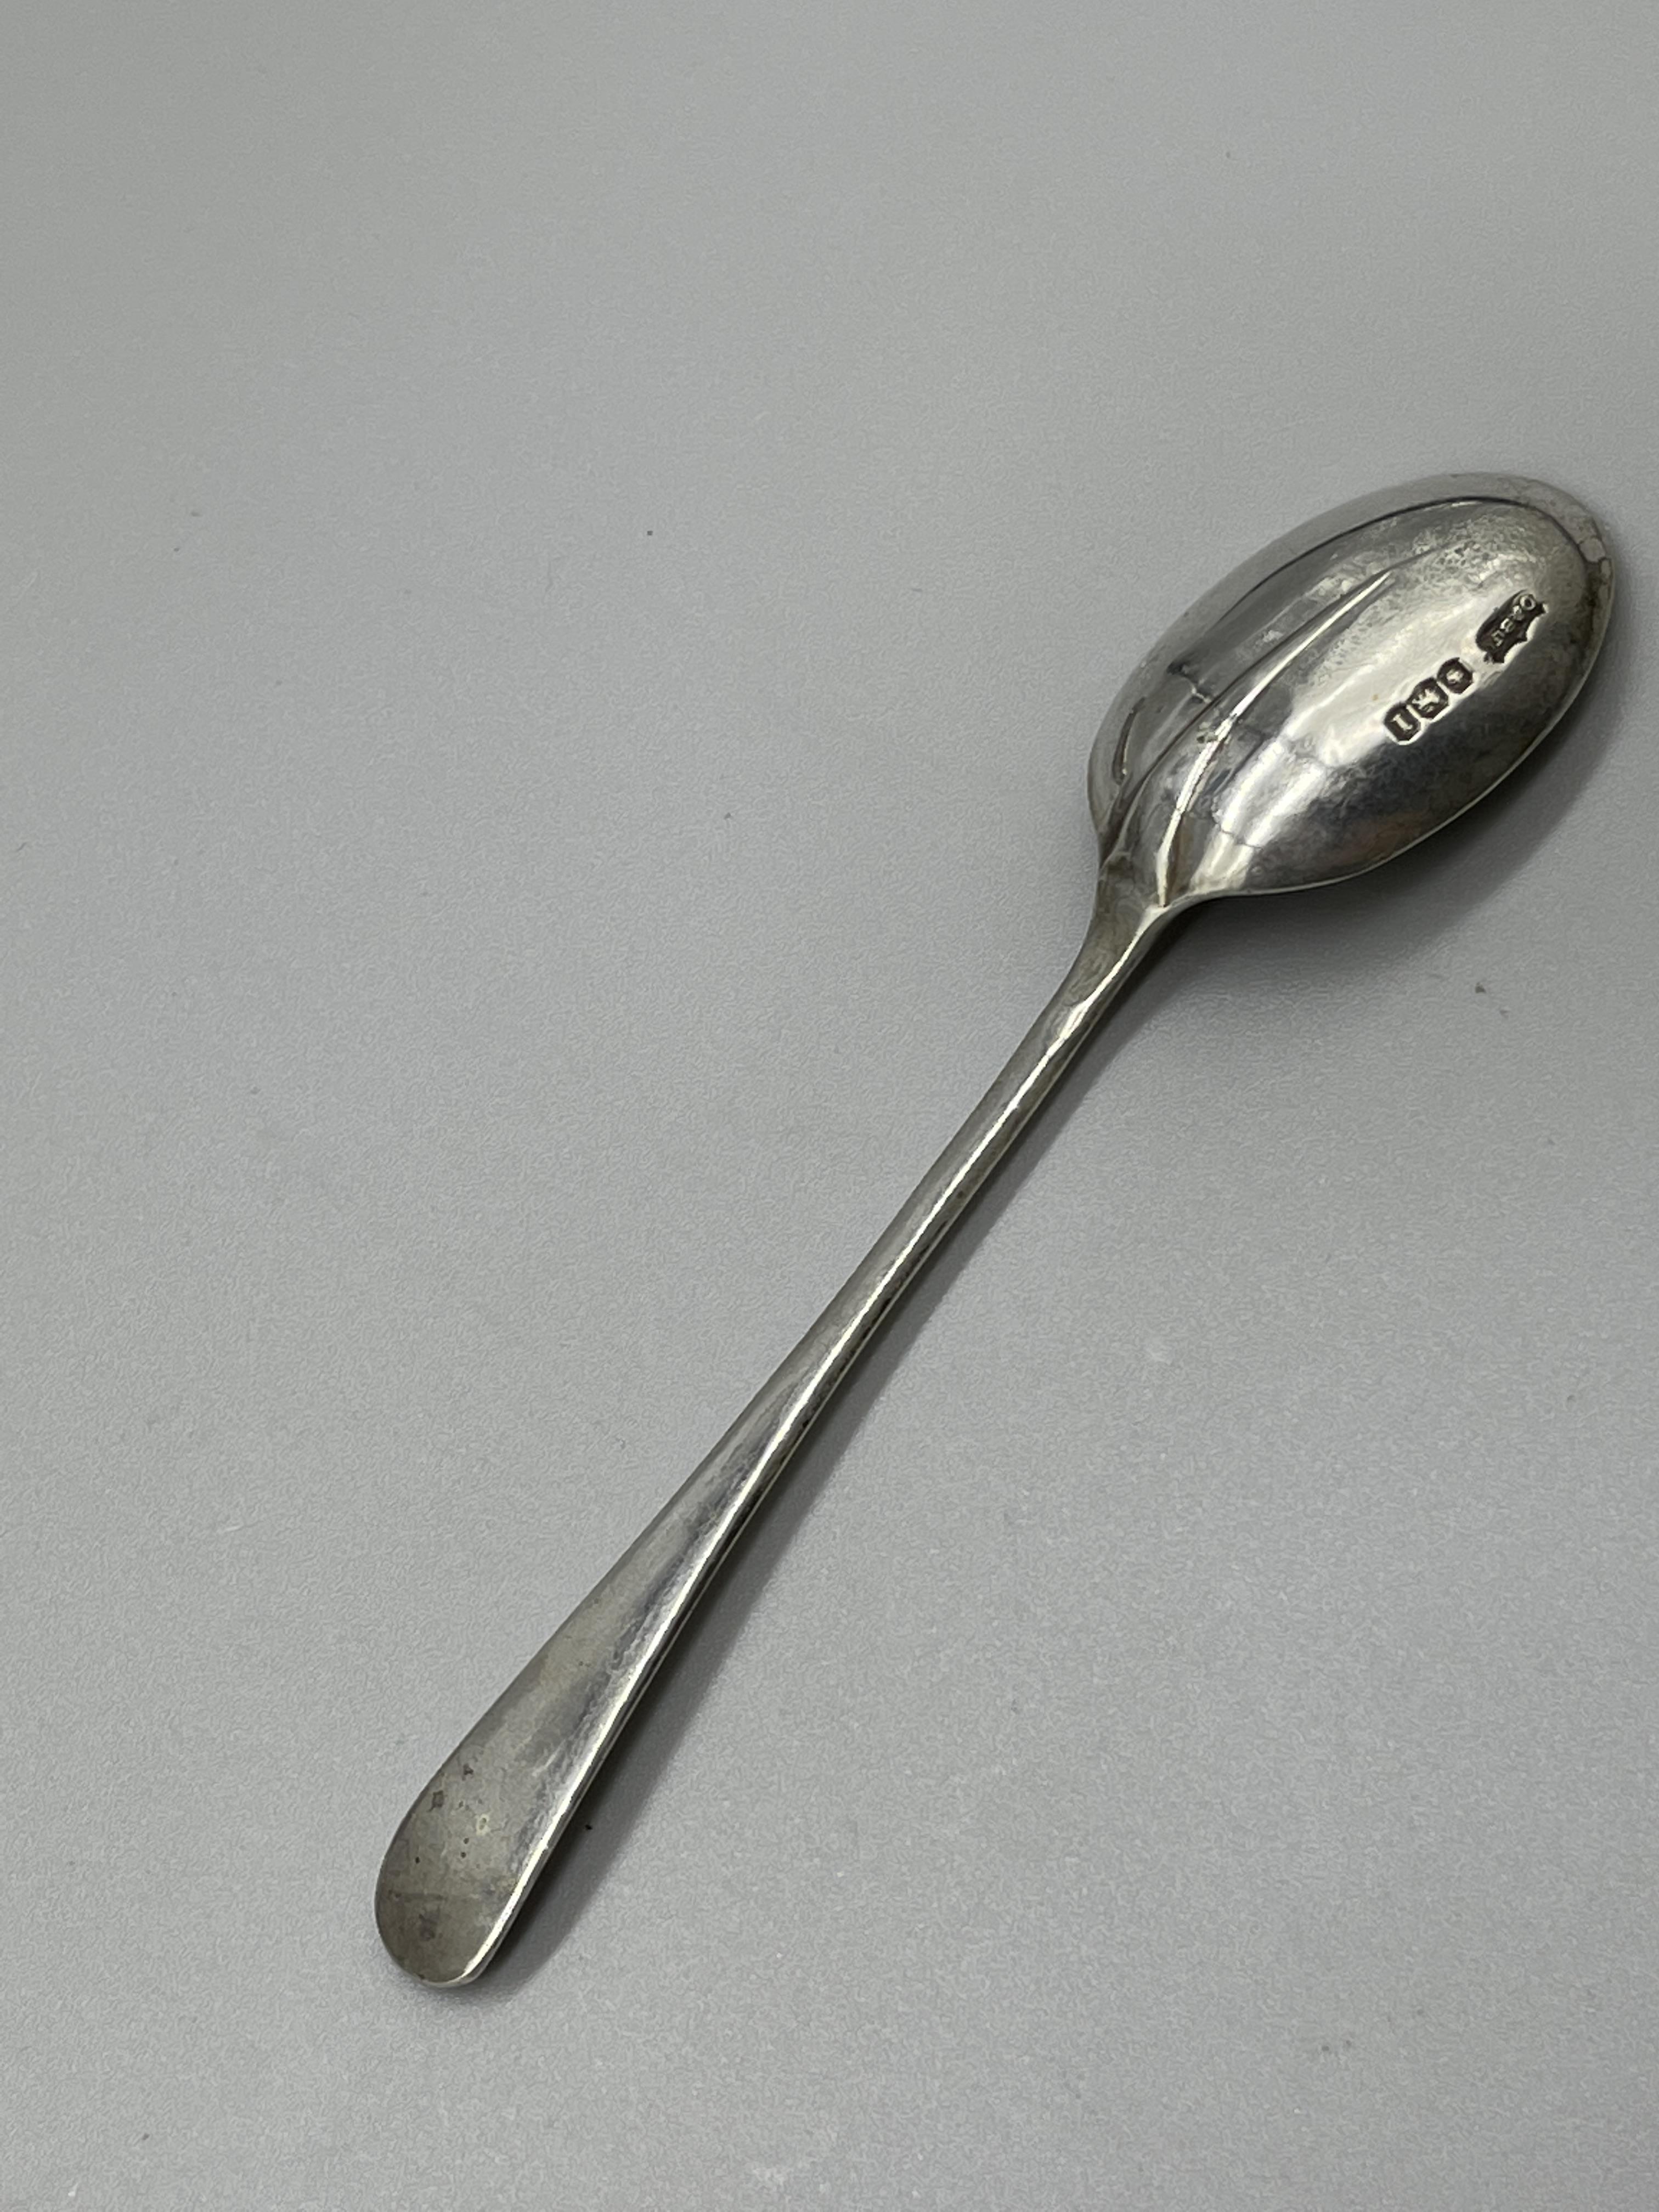 HM Silver Creamer, egg cup and spoon. Weight 98gr - Image 4 of 6